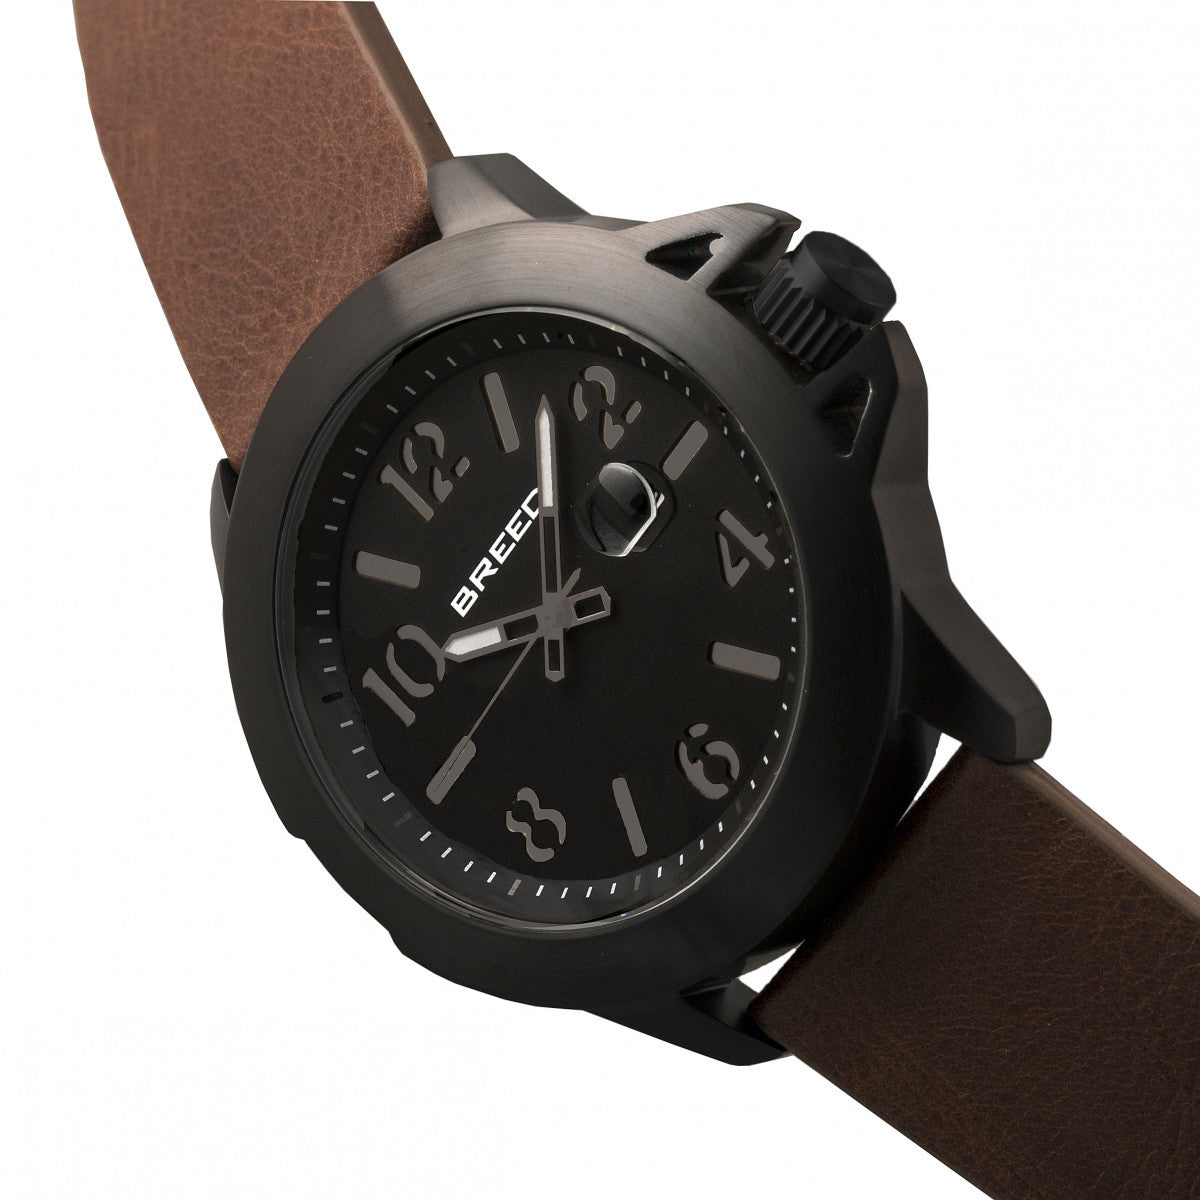 Breed Bryant Leather-Band Watch w/Date - Black/Brown - BRD7104